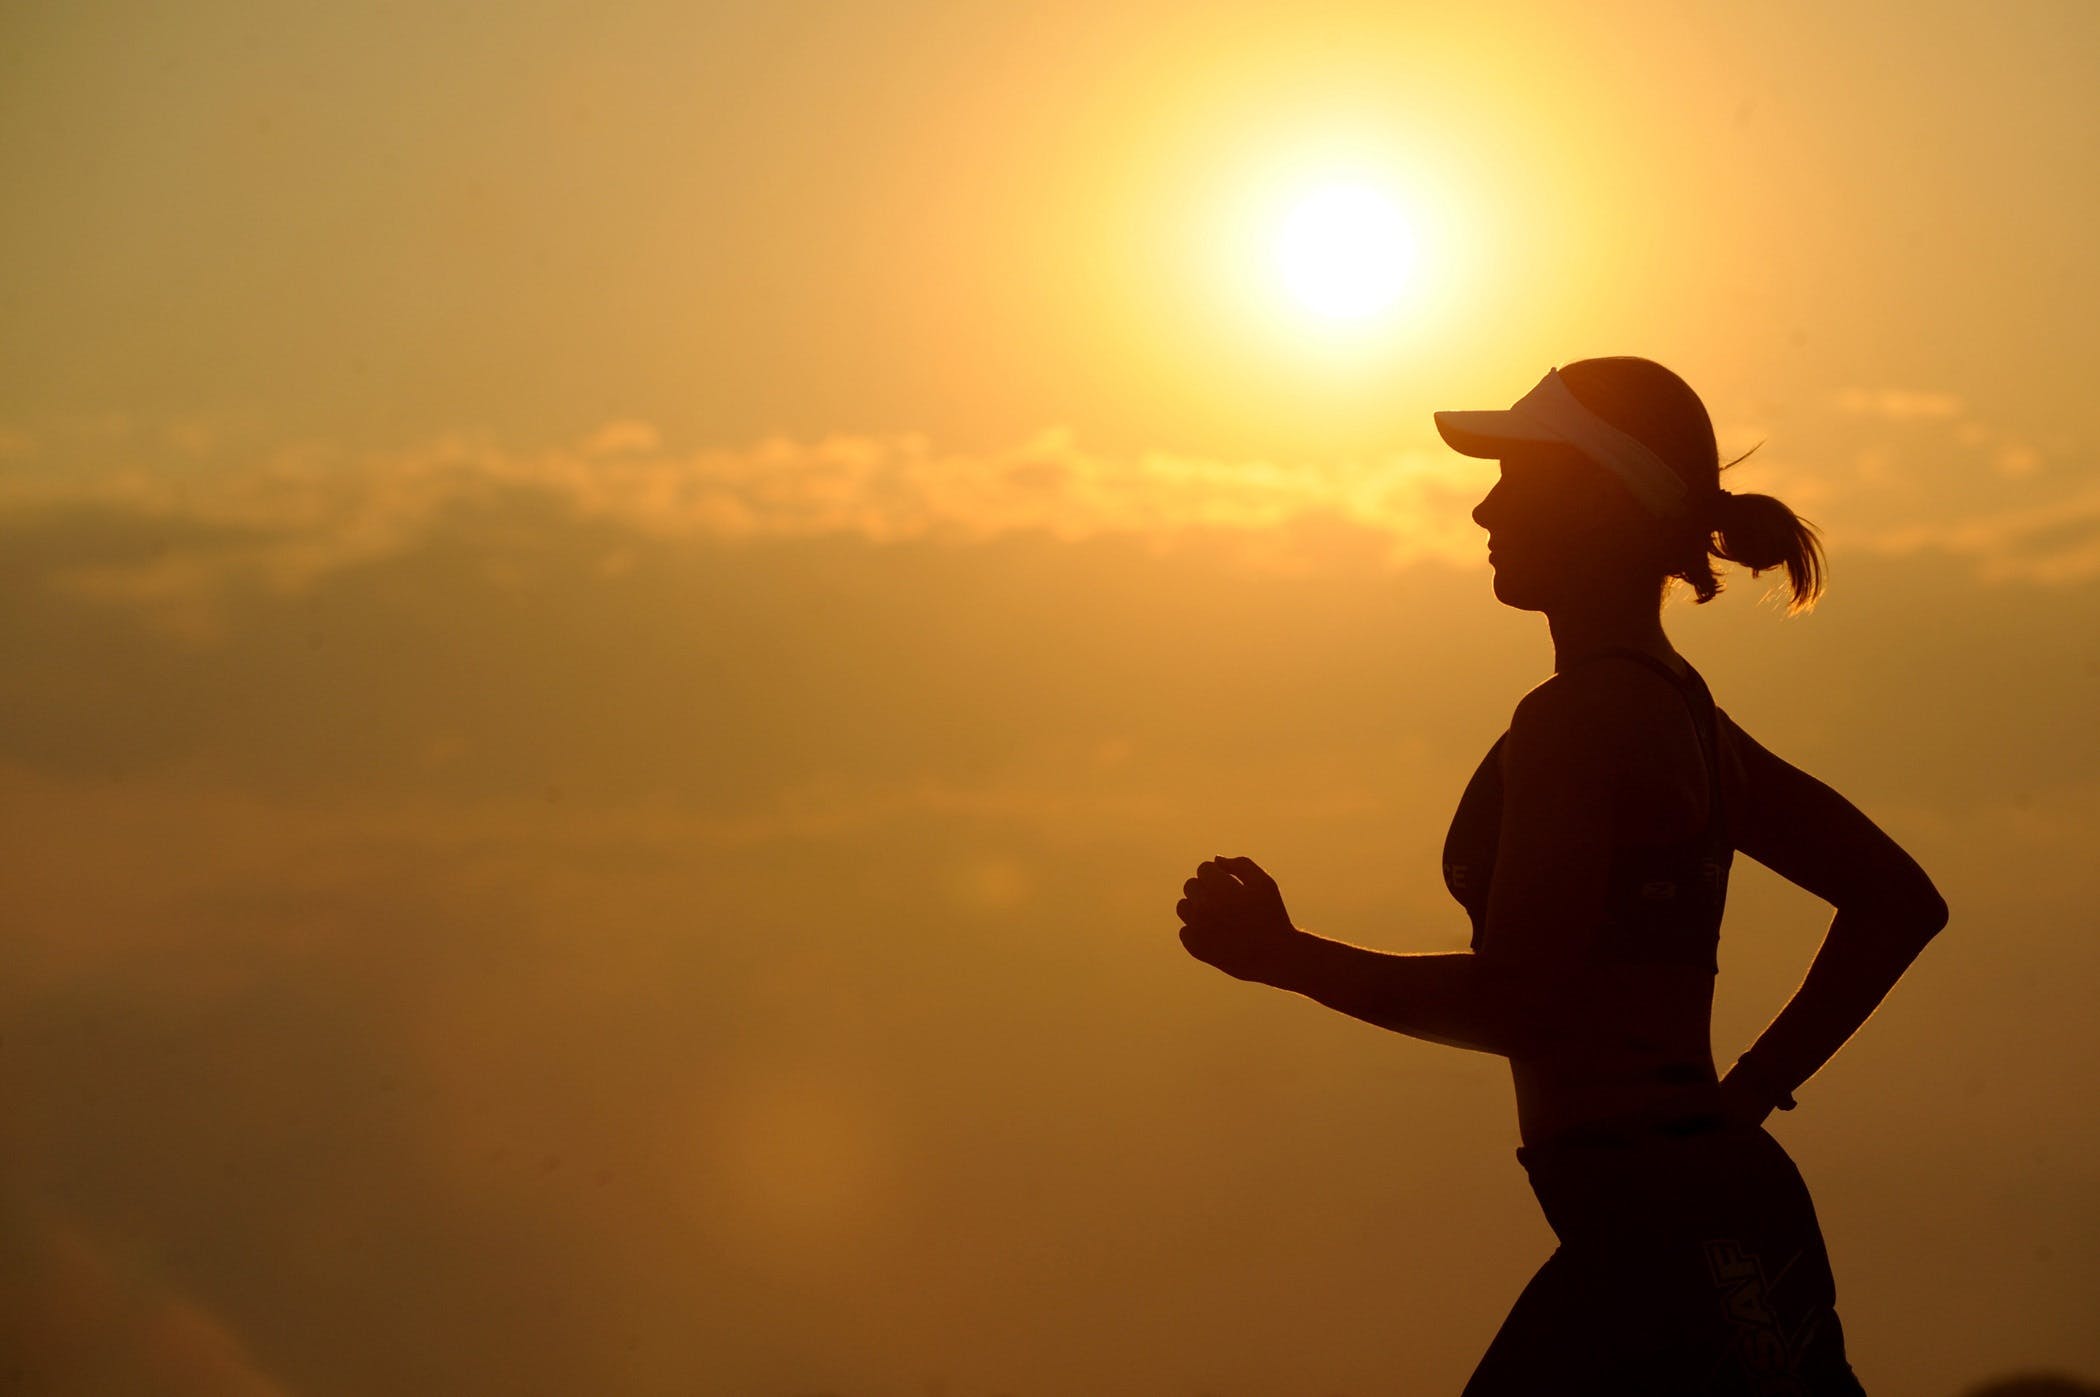 A silhouette of a woman jogging at sunset.